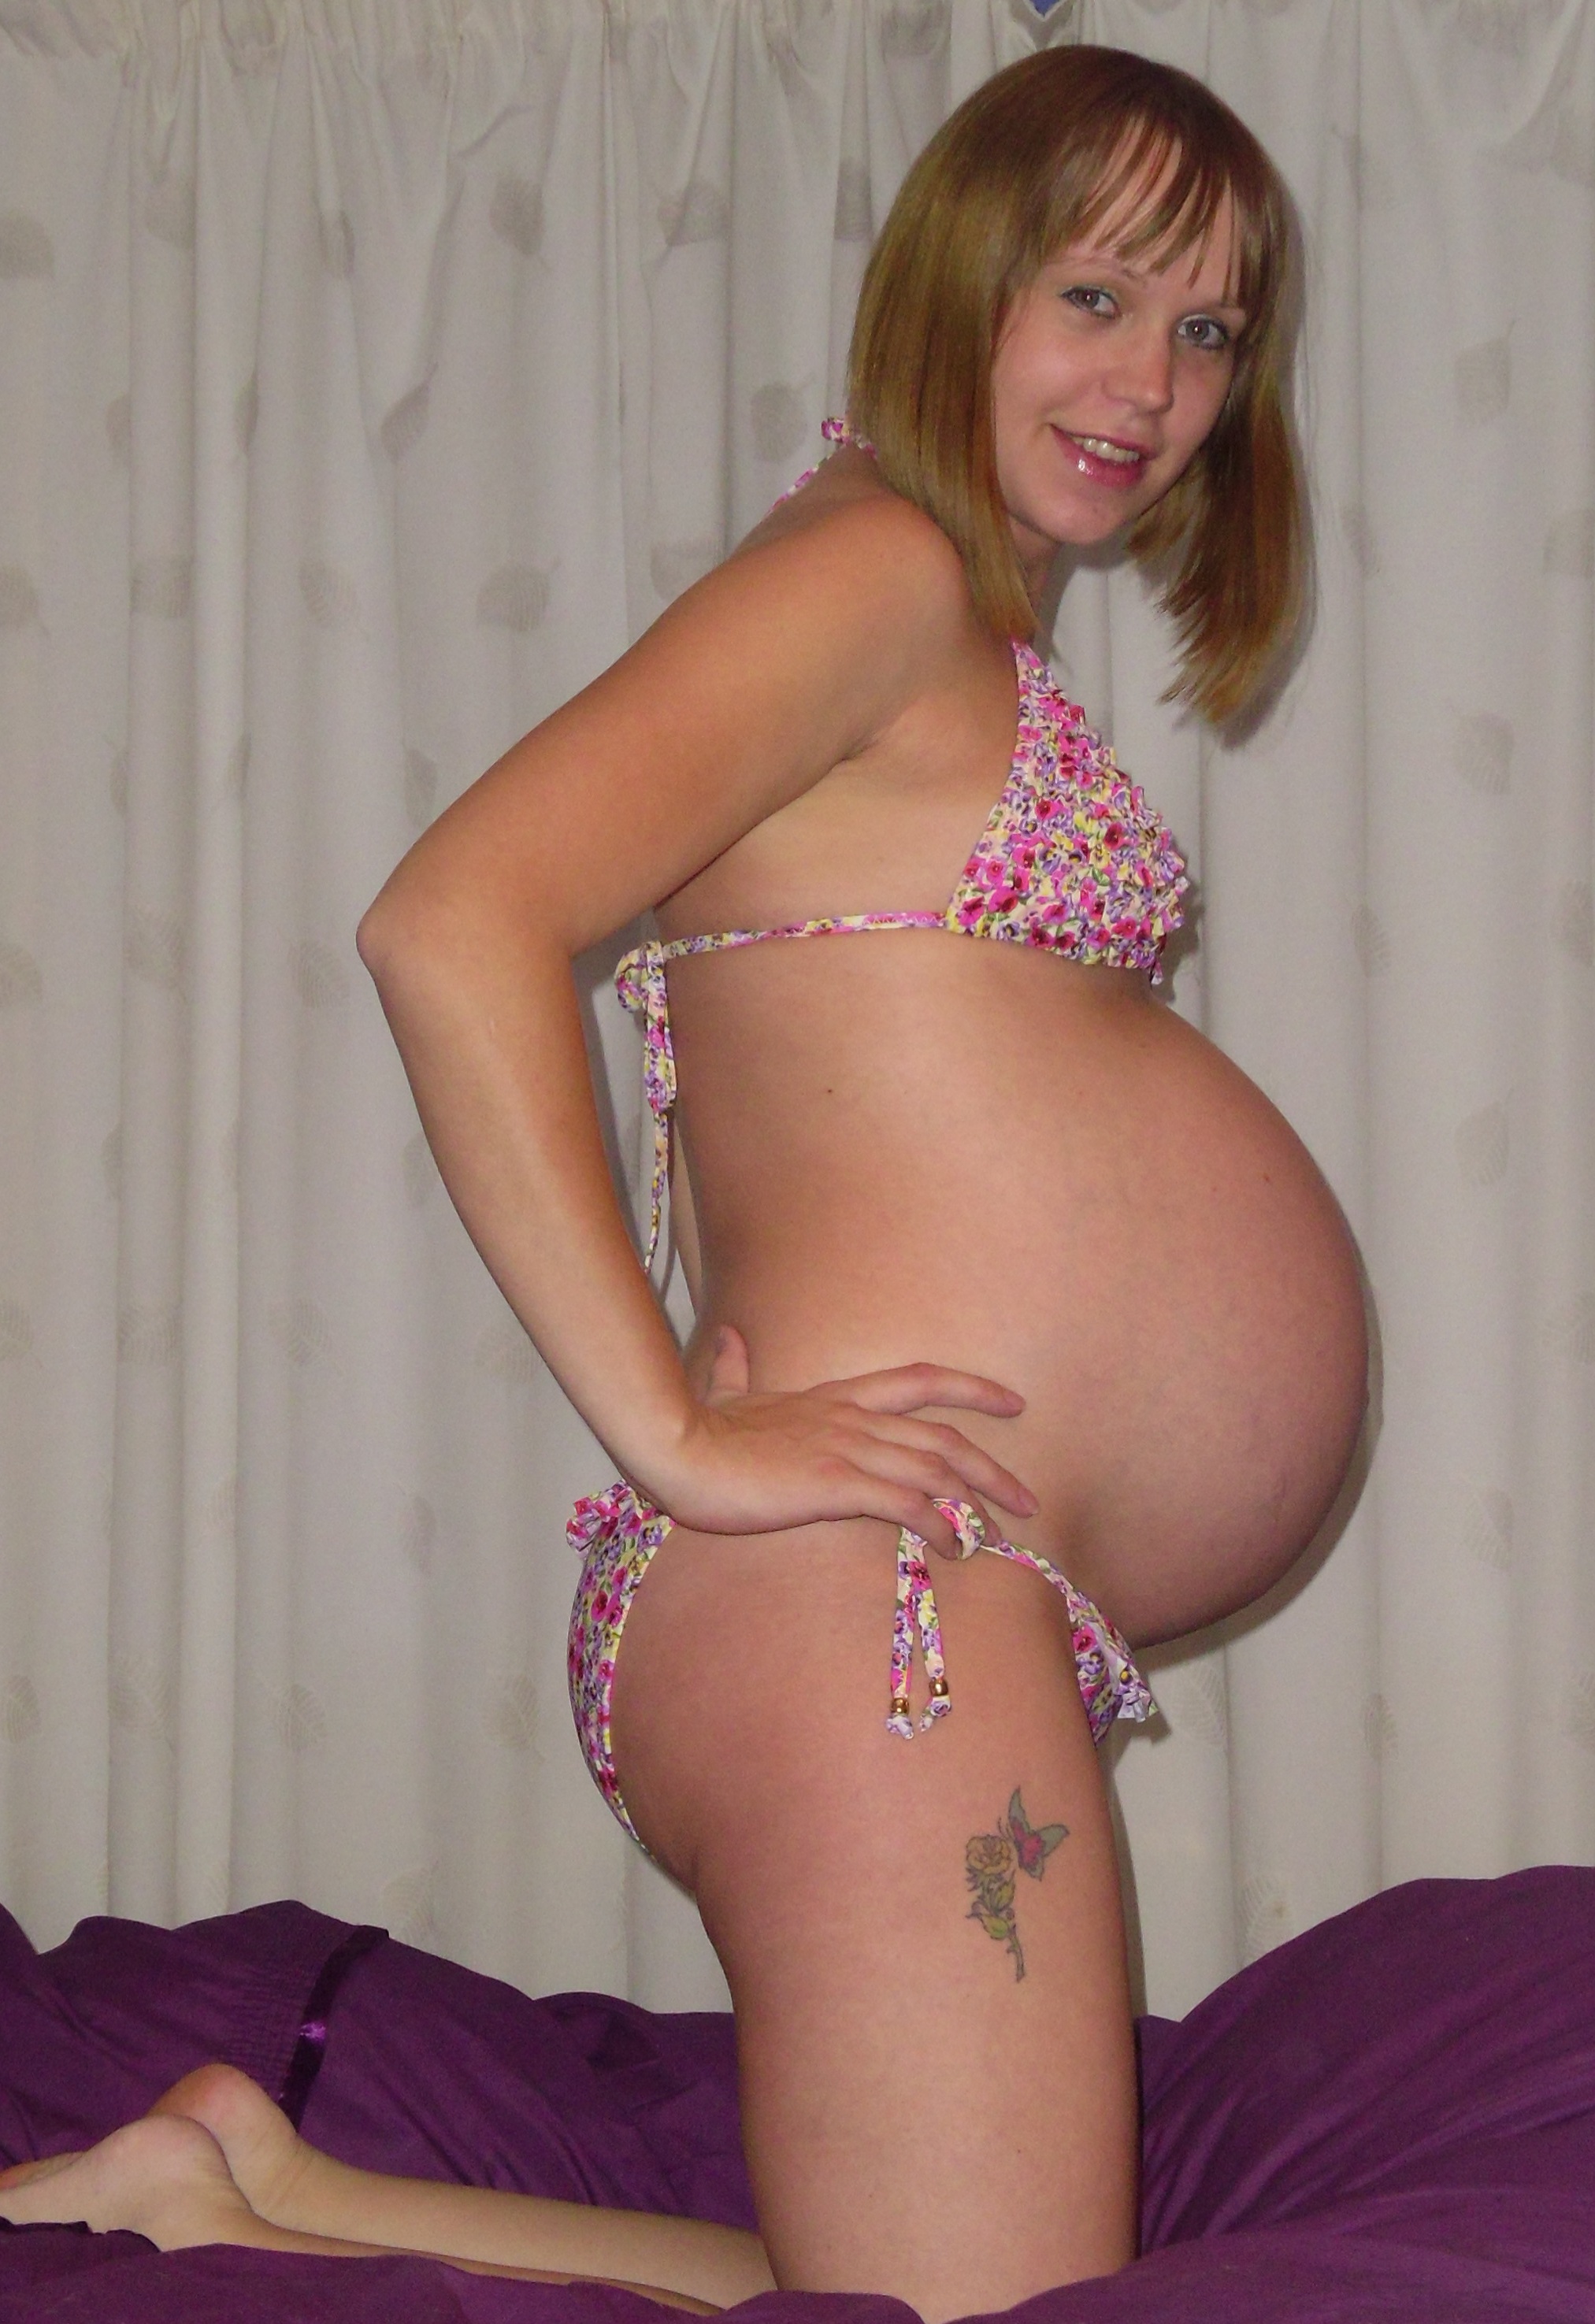 Pregnant Model Pictures 77